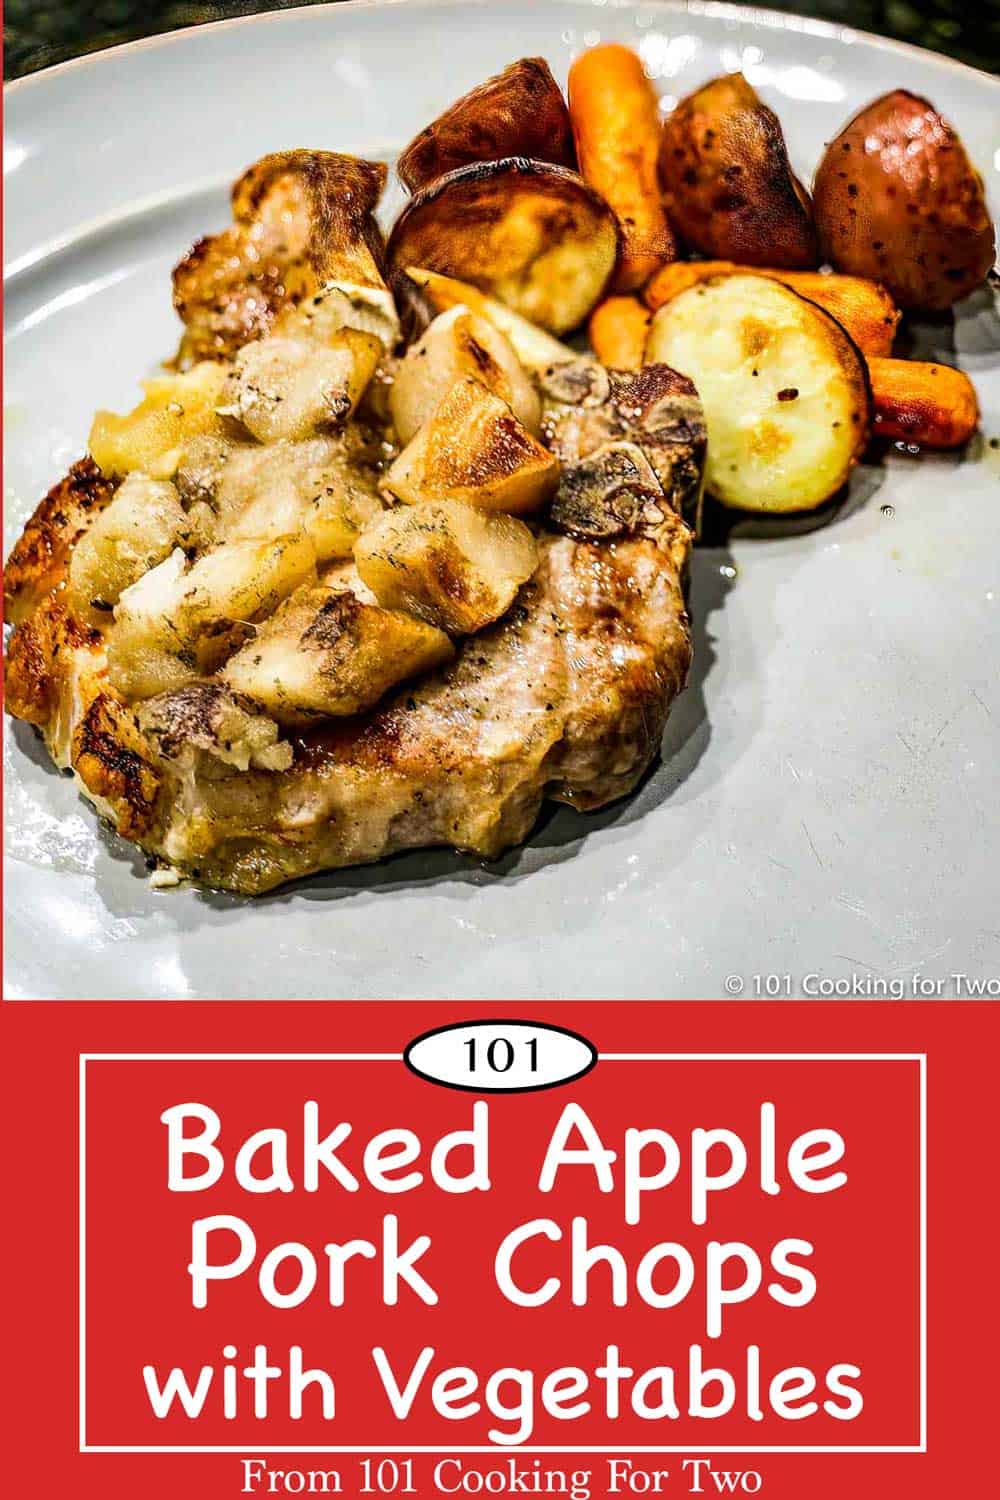 Sheet Pan Baked Apple Pork Chops with Vegetables - 101 Cooking For Two